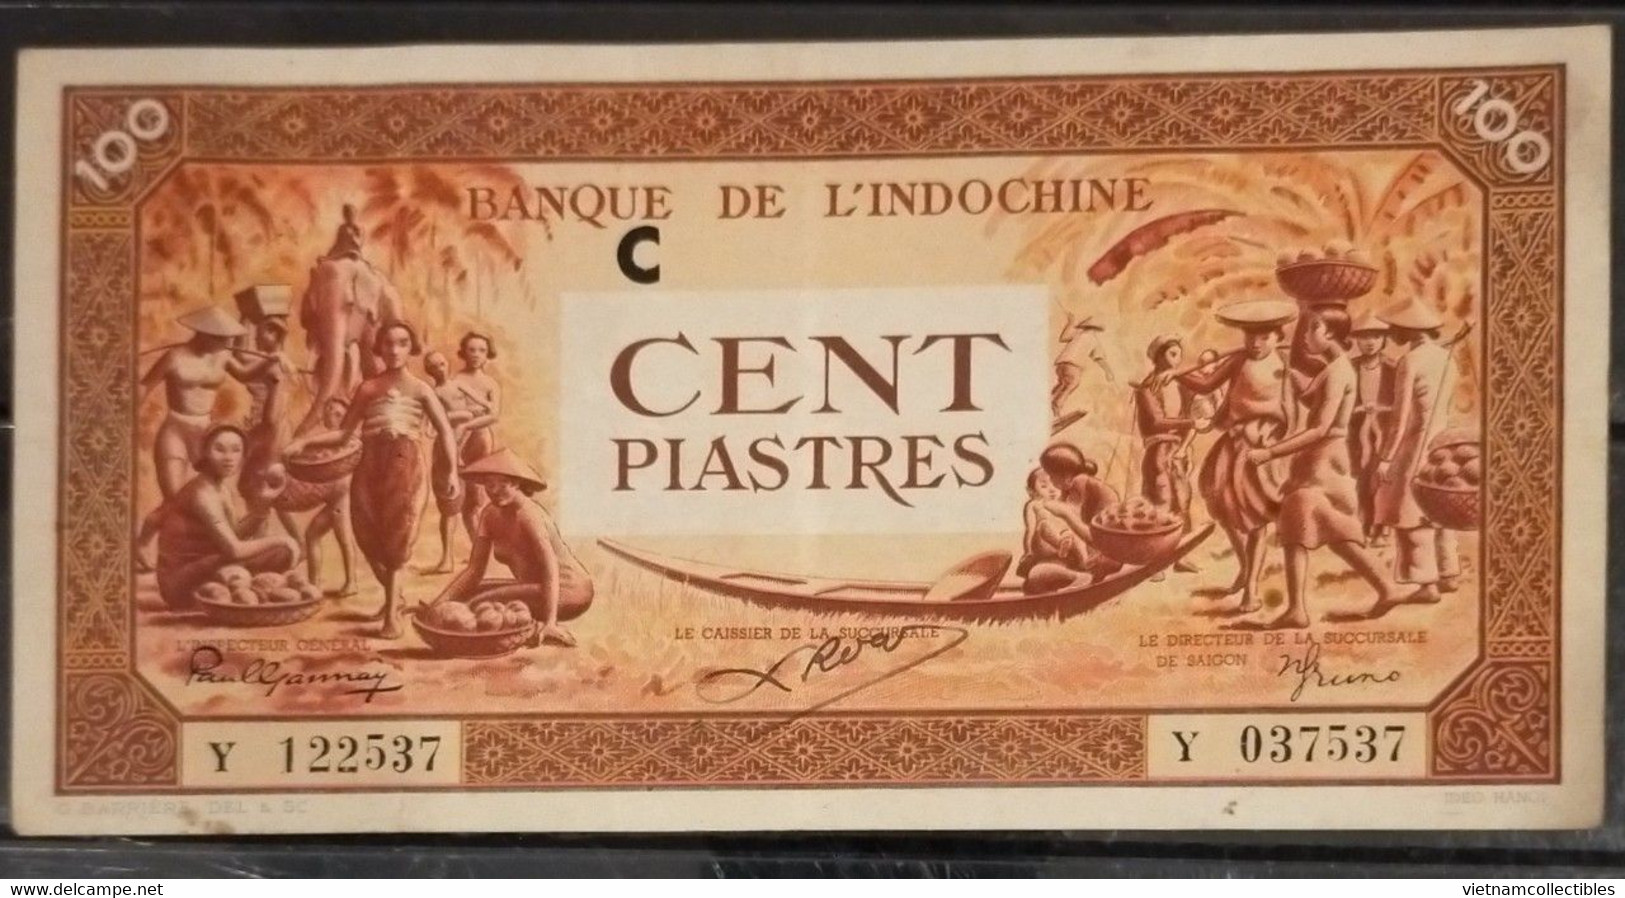 French Indochine Indochina Vietnam Viet Nam Laos Cambodia VF++ 100 Piastres Banknote Note 1942-45 / Pick # 66 - Letter C - Indochina